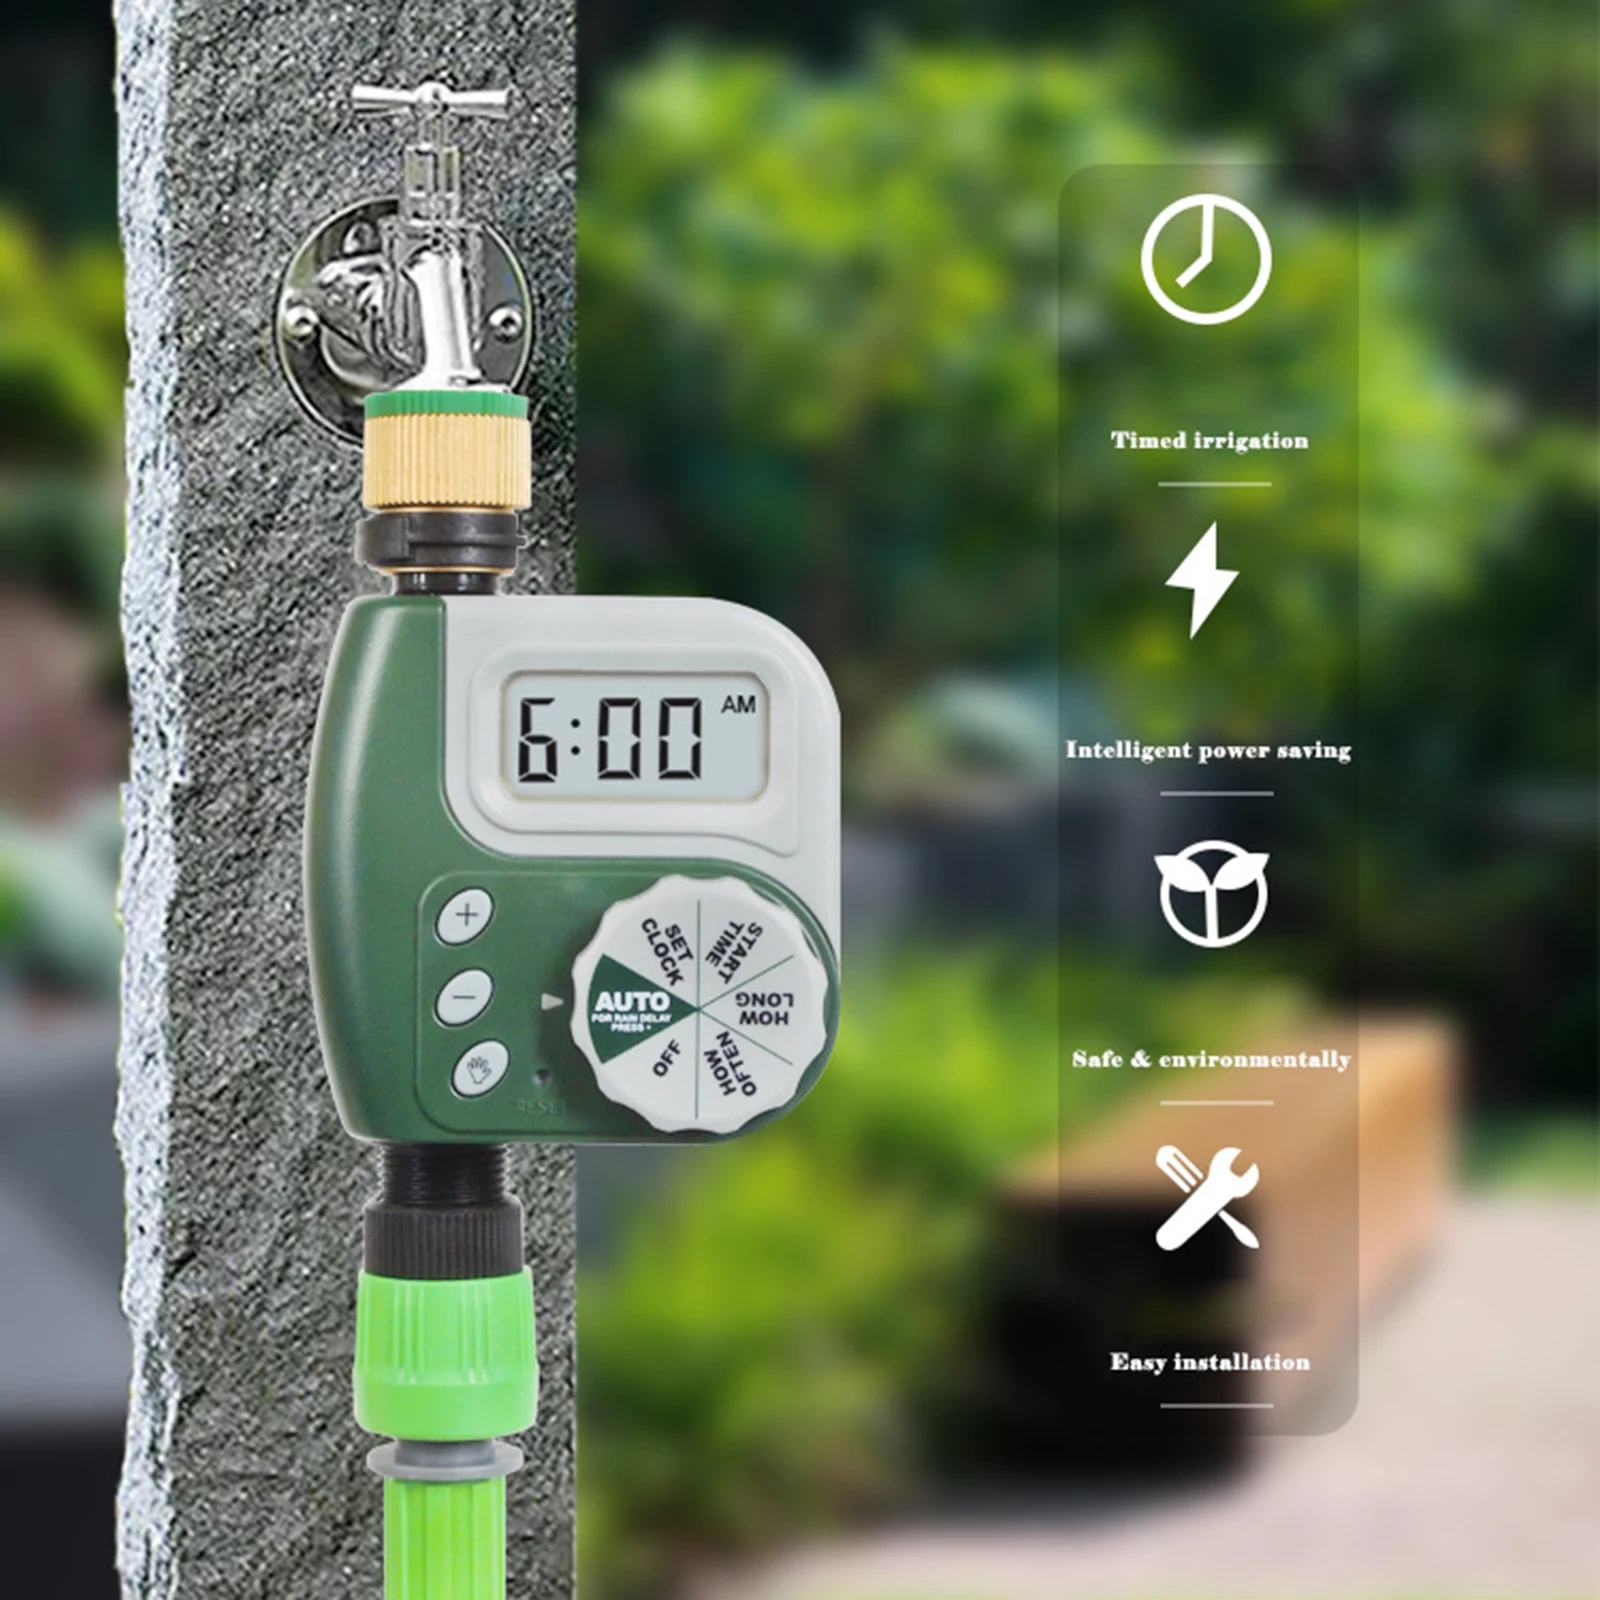 Home Smart Automatic Water Tap Timer Electronic Digital Irrigation Controllers Outdoor Garden Sprinkler Watering Timer Tool